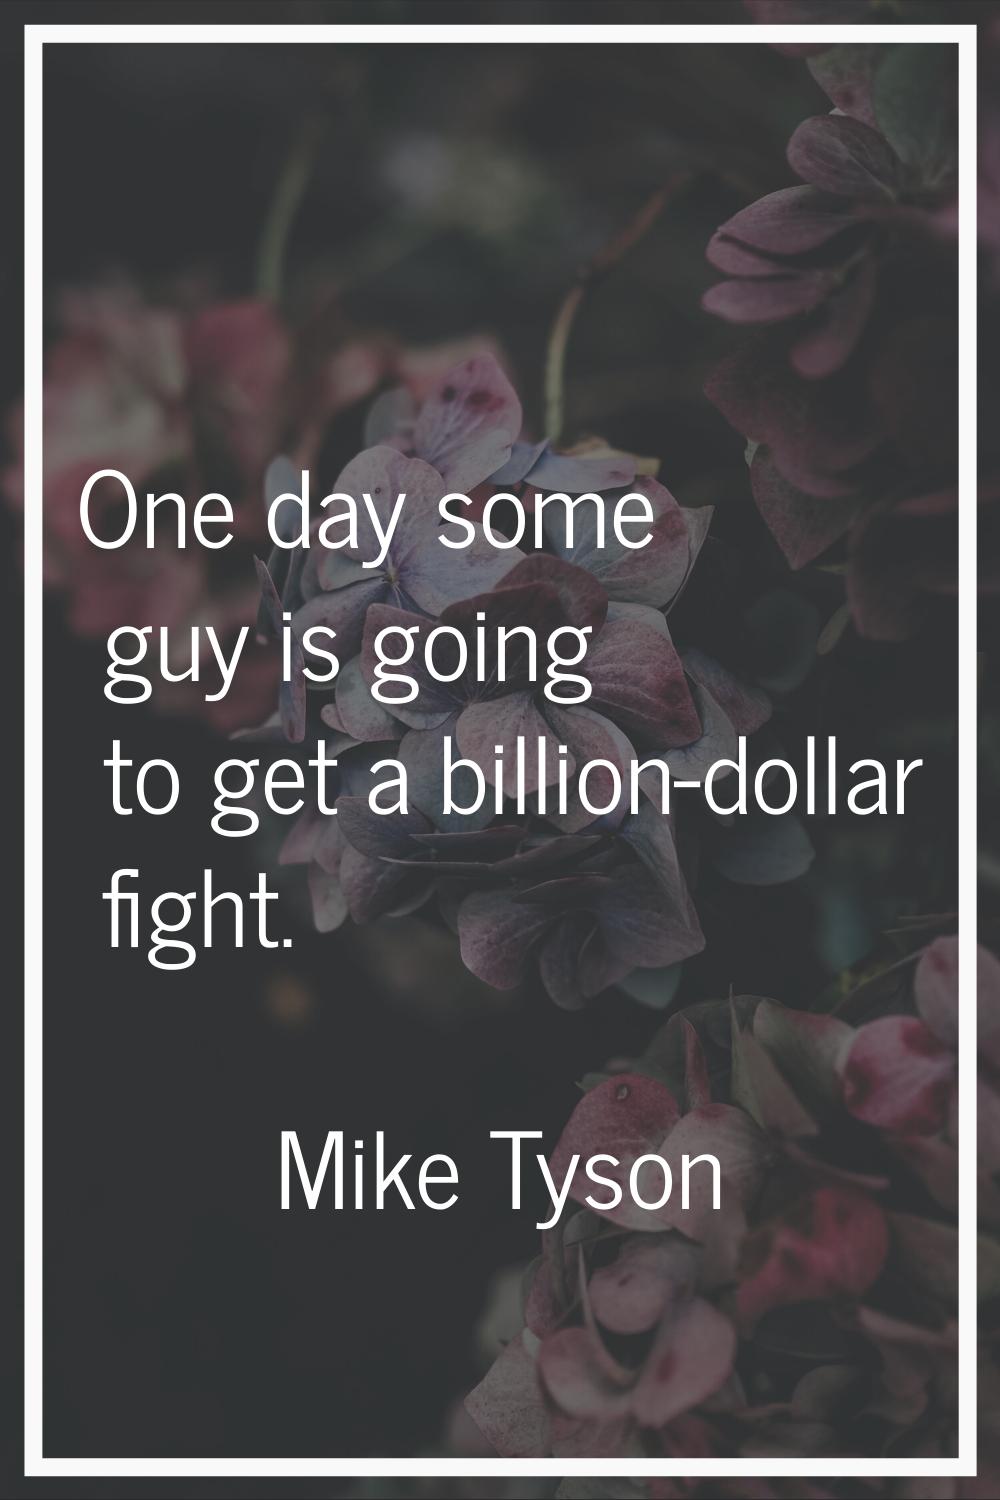 One day some guy is going to get a billion-dollar fight.